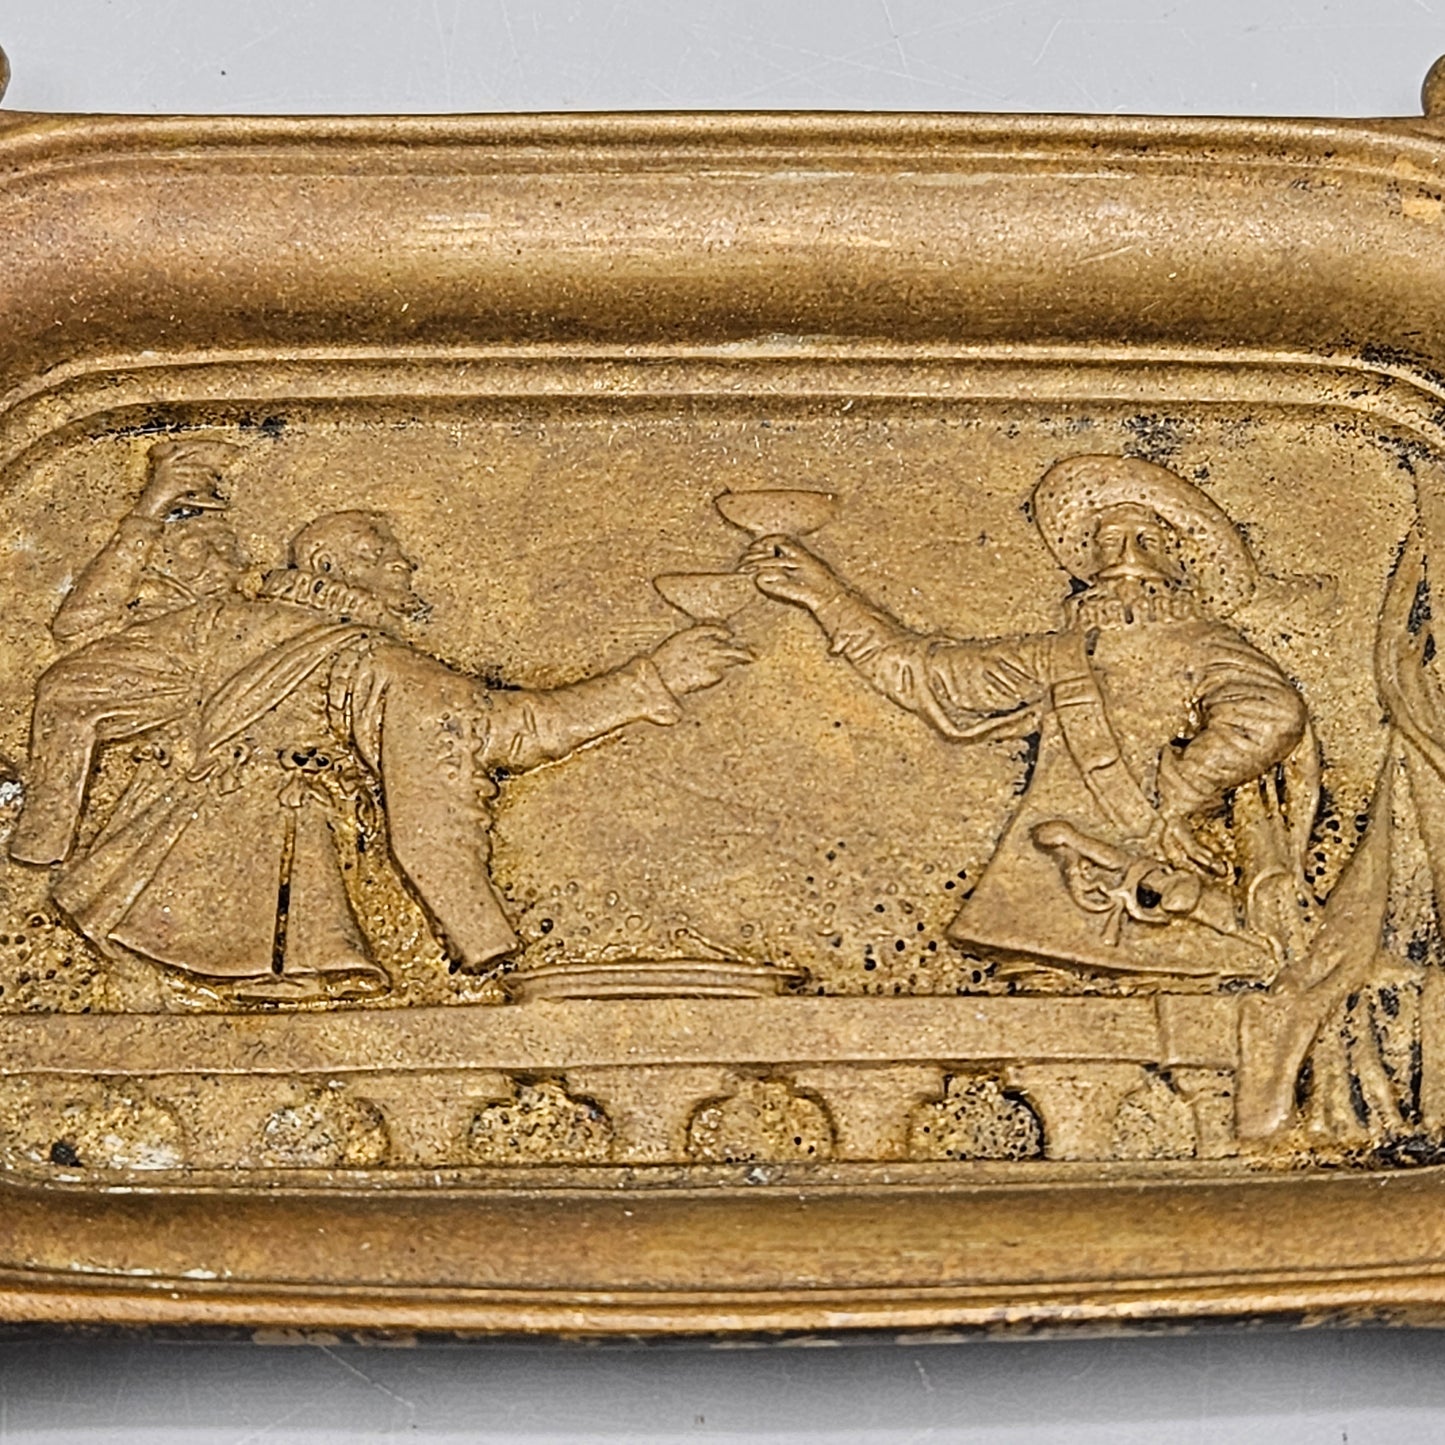 Antique Brass Pen Tray with Cavaliers Drinking